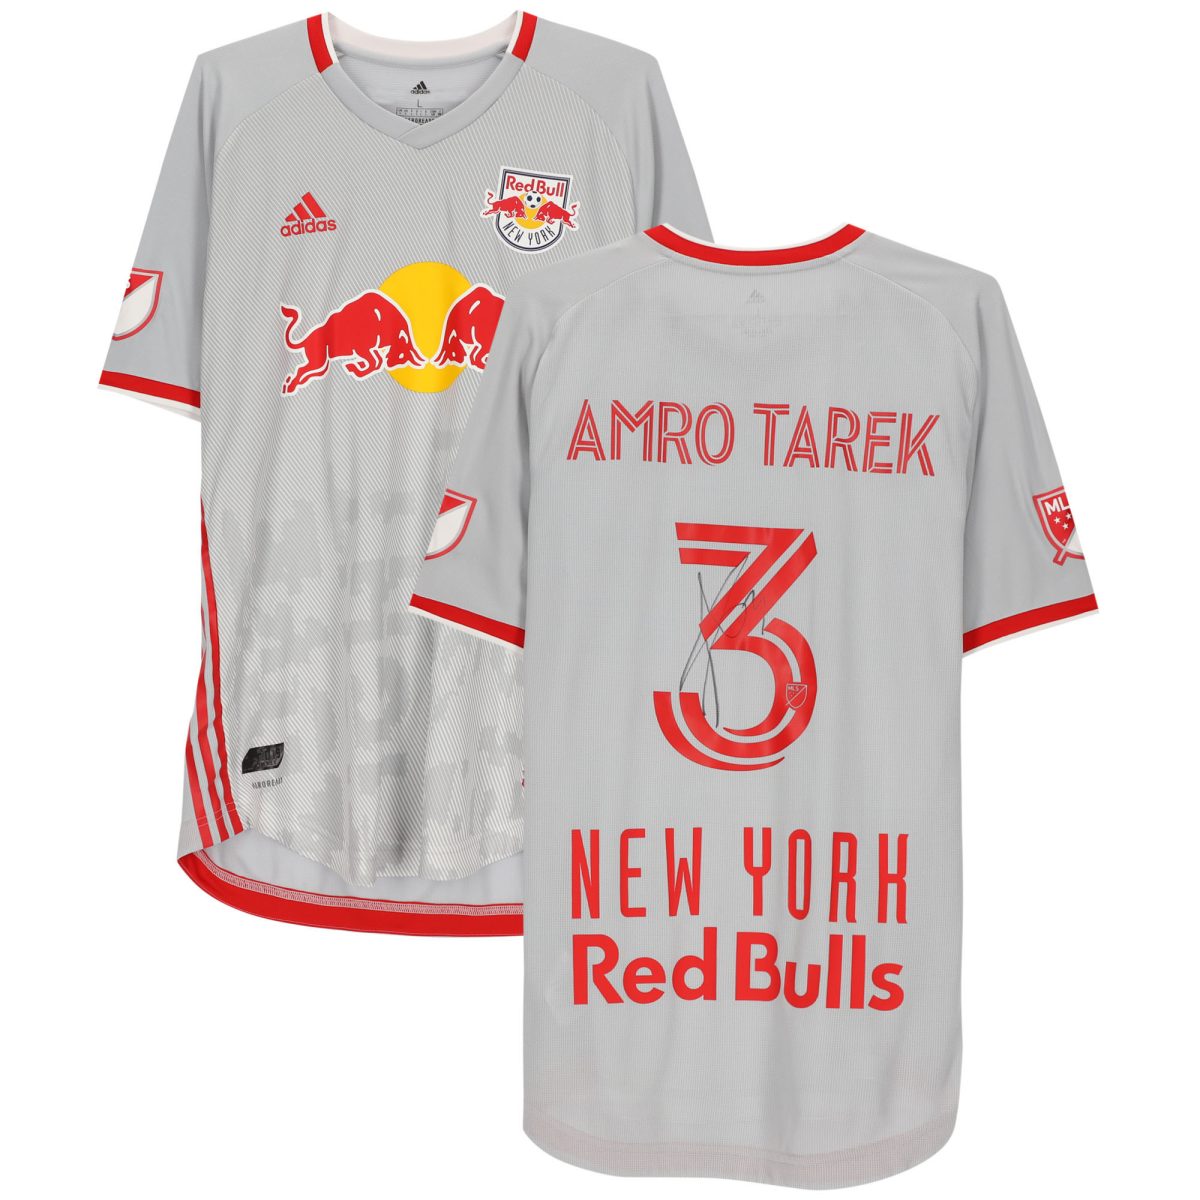 Amro Tarek New York Red Bulls Autographed Match-Used #3 Gray Jersey from the 2020 MLS Season